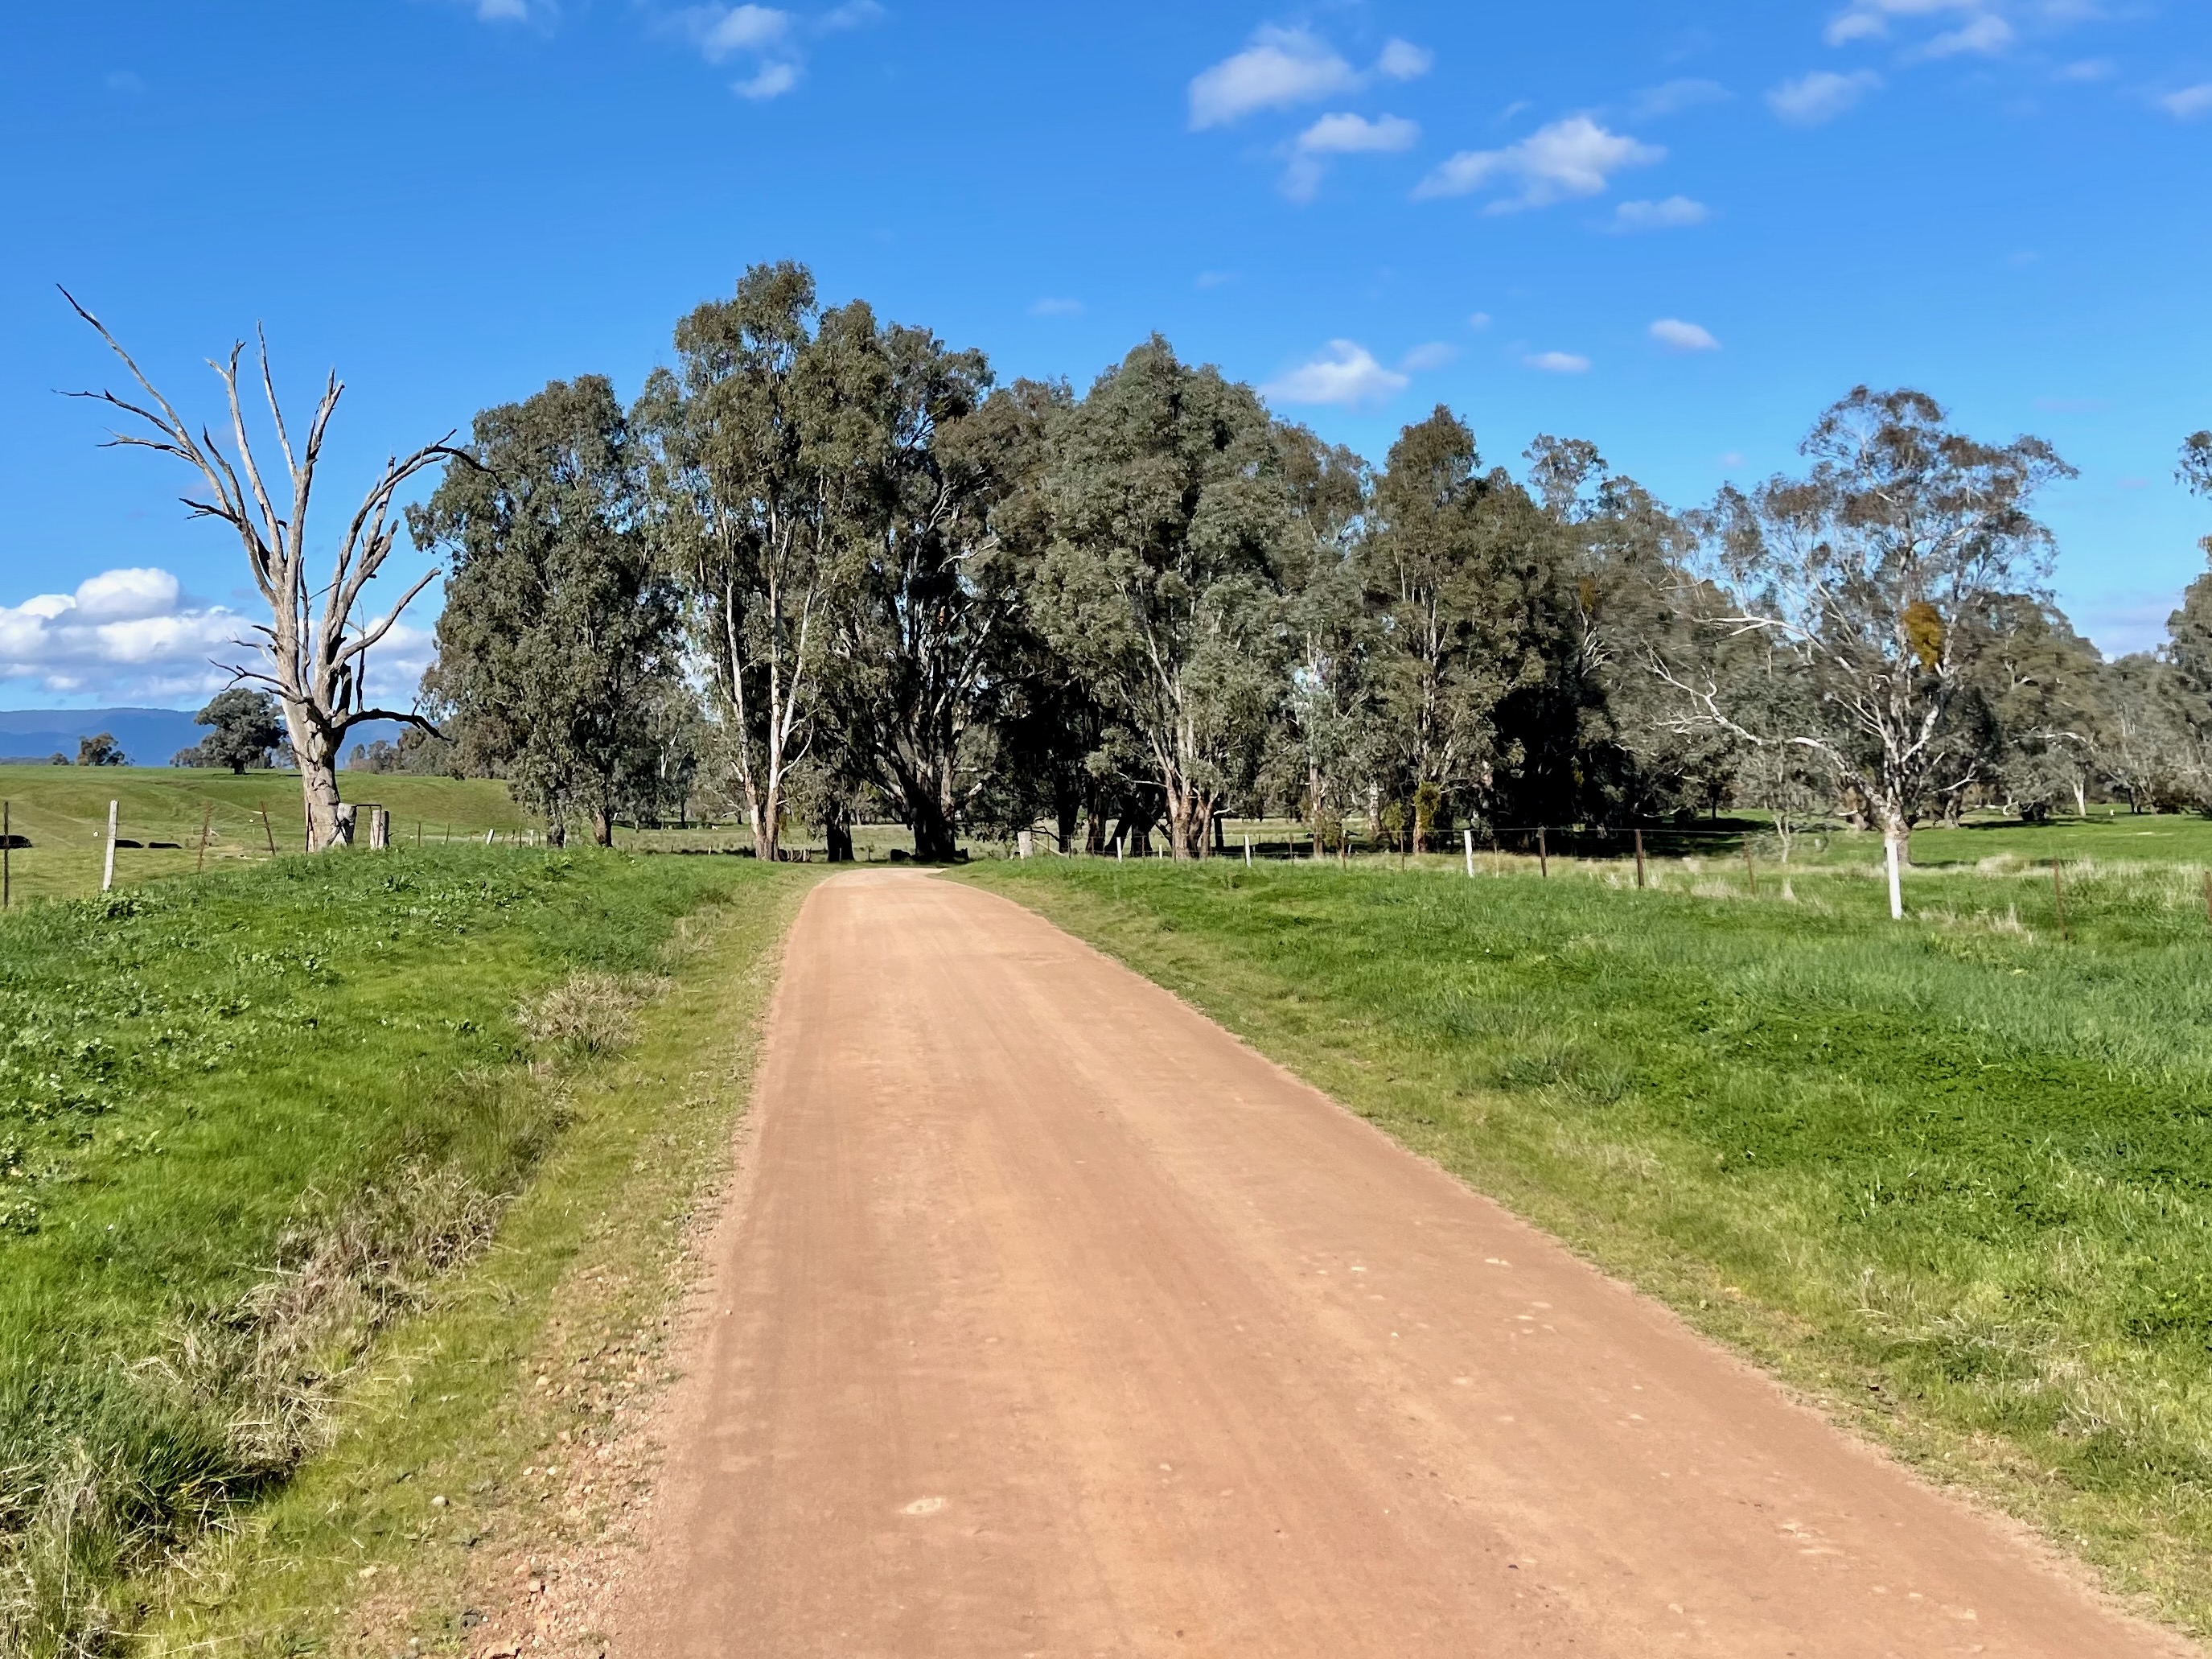 Gravel roads lined with native bushland in the distance